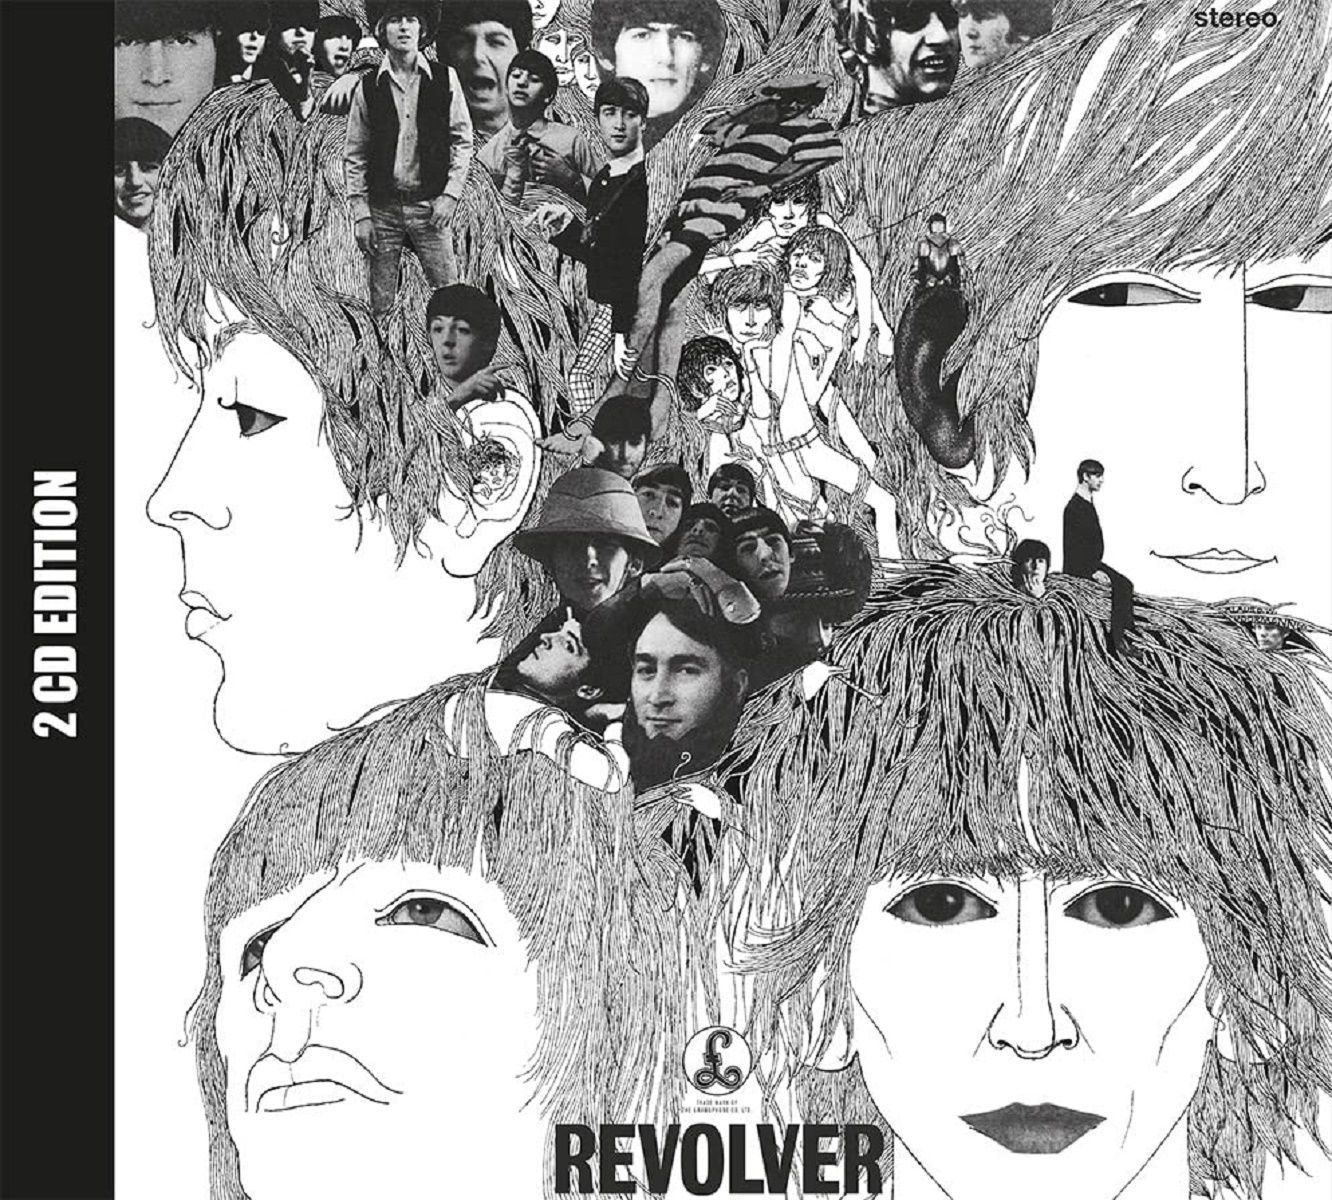 THE BEATLES - REVOLVER (SESSIONS HIGHLIGHTS) (2 CD)